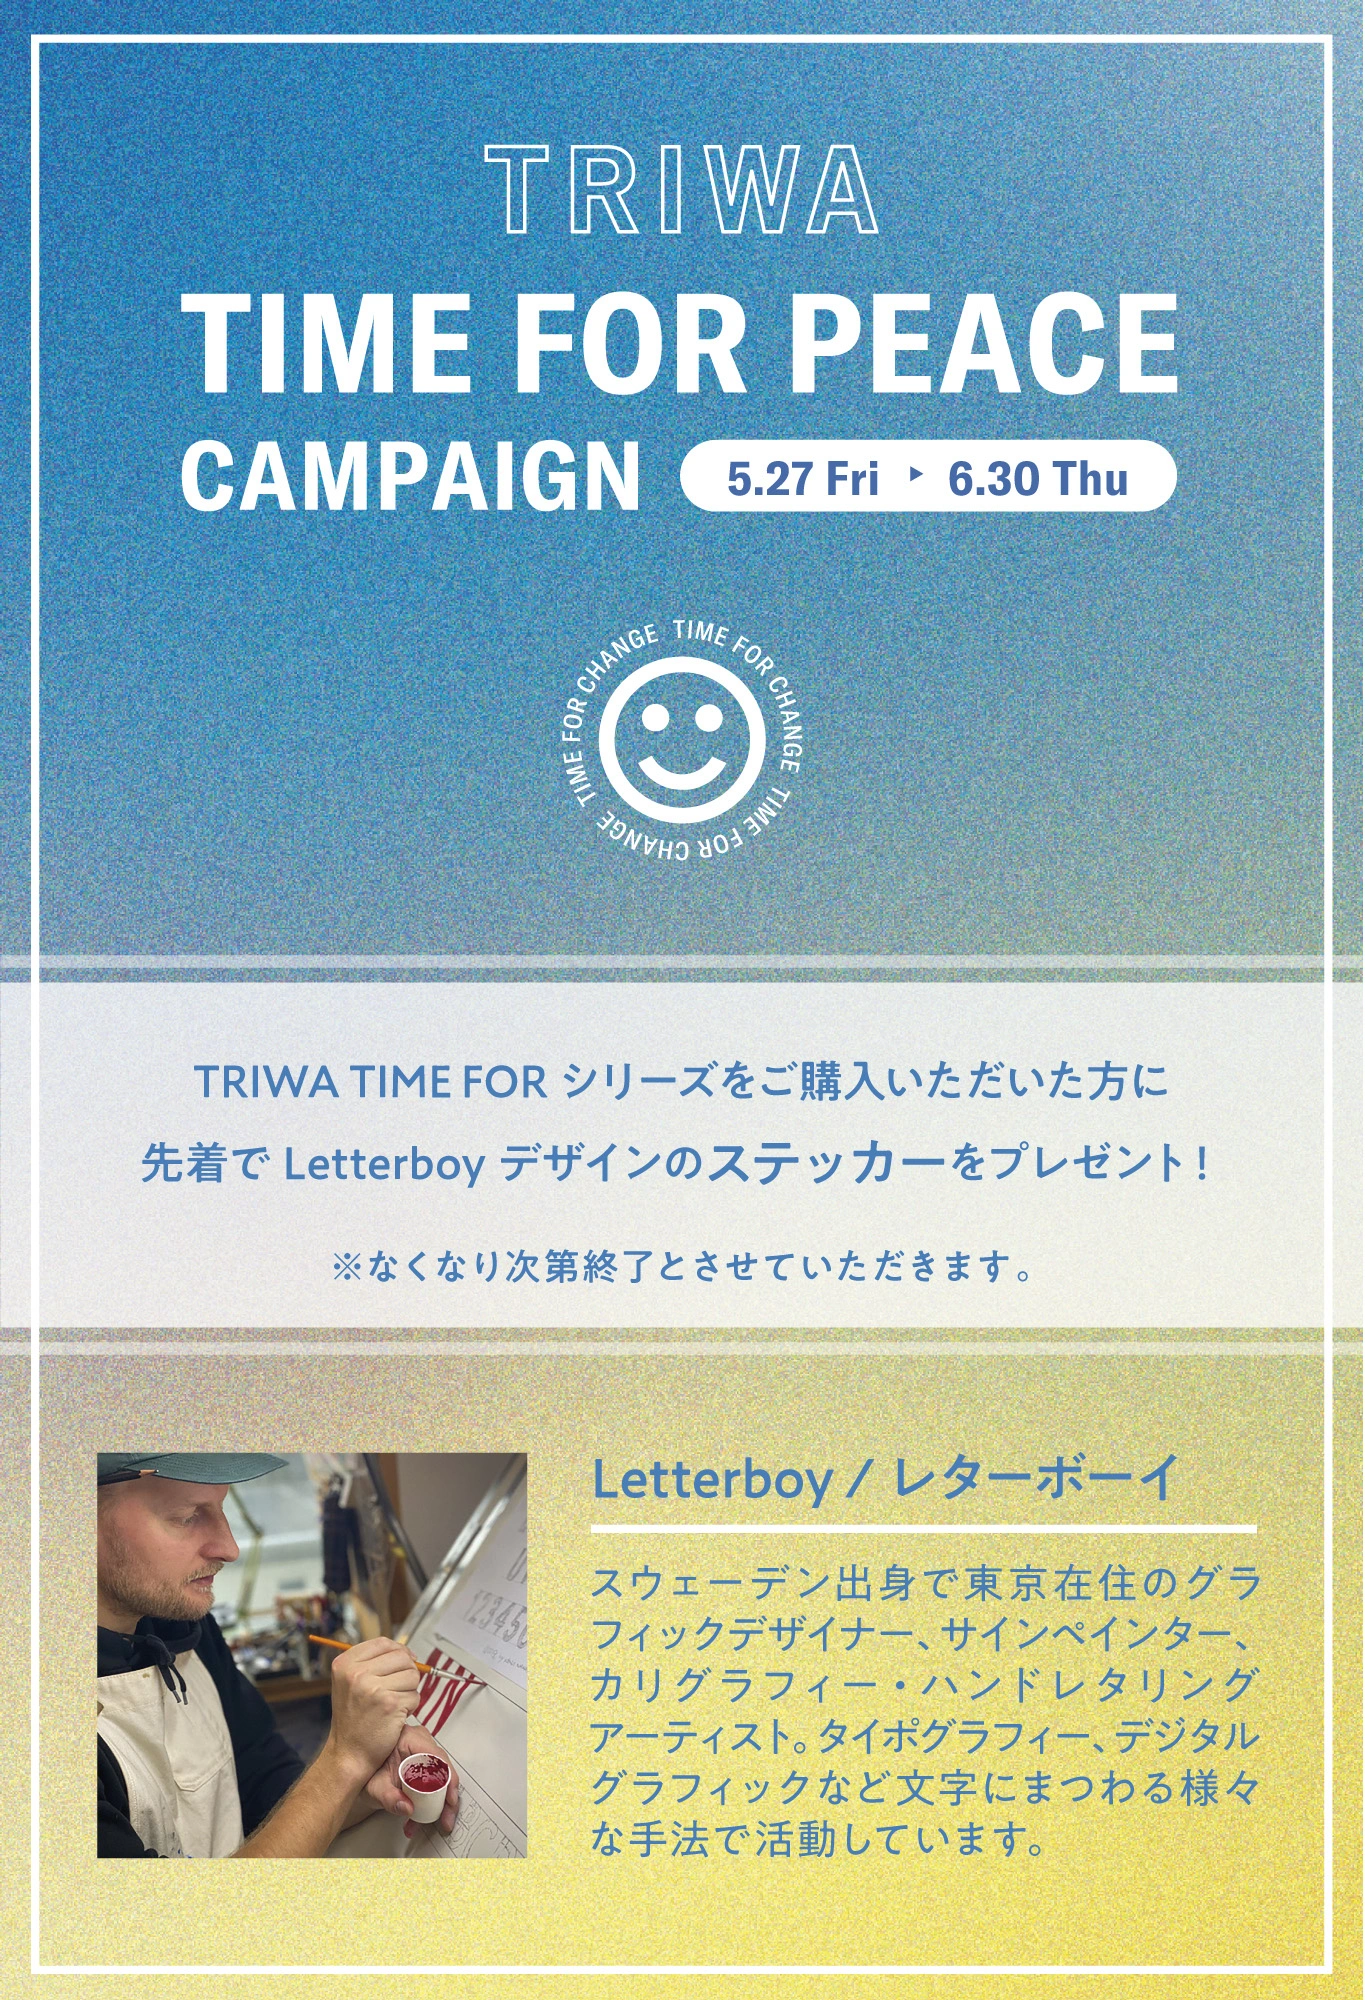 TRIWA TIME FOR PEACE CAMPAIGN